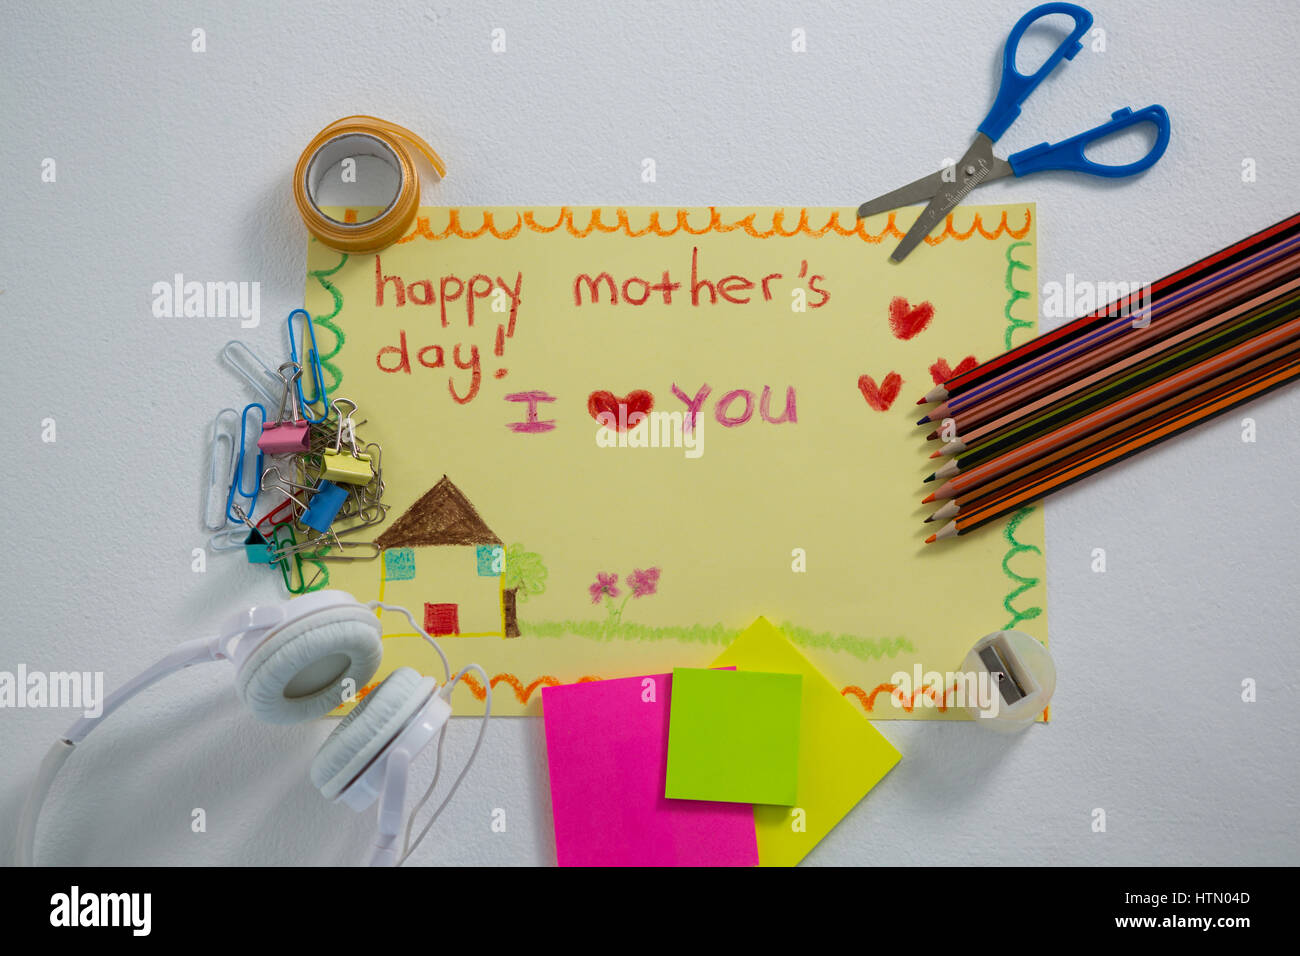 Stationery with happy mothers day greetings card on white background Stock Photo